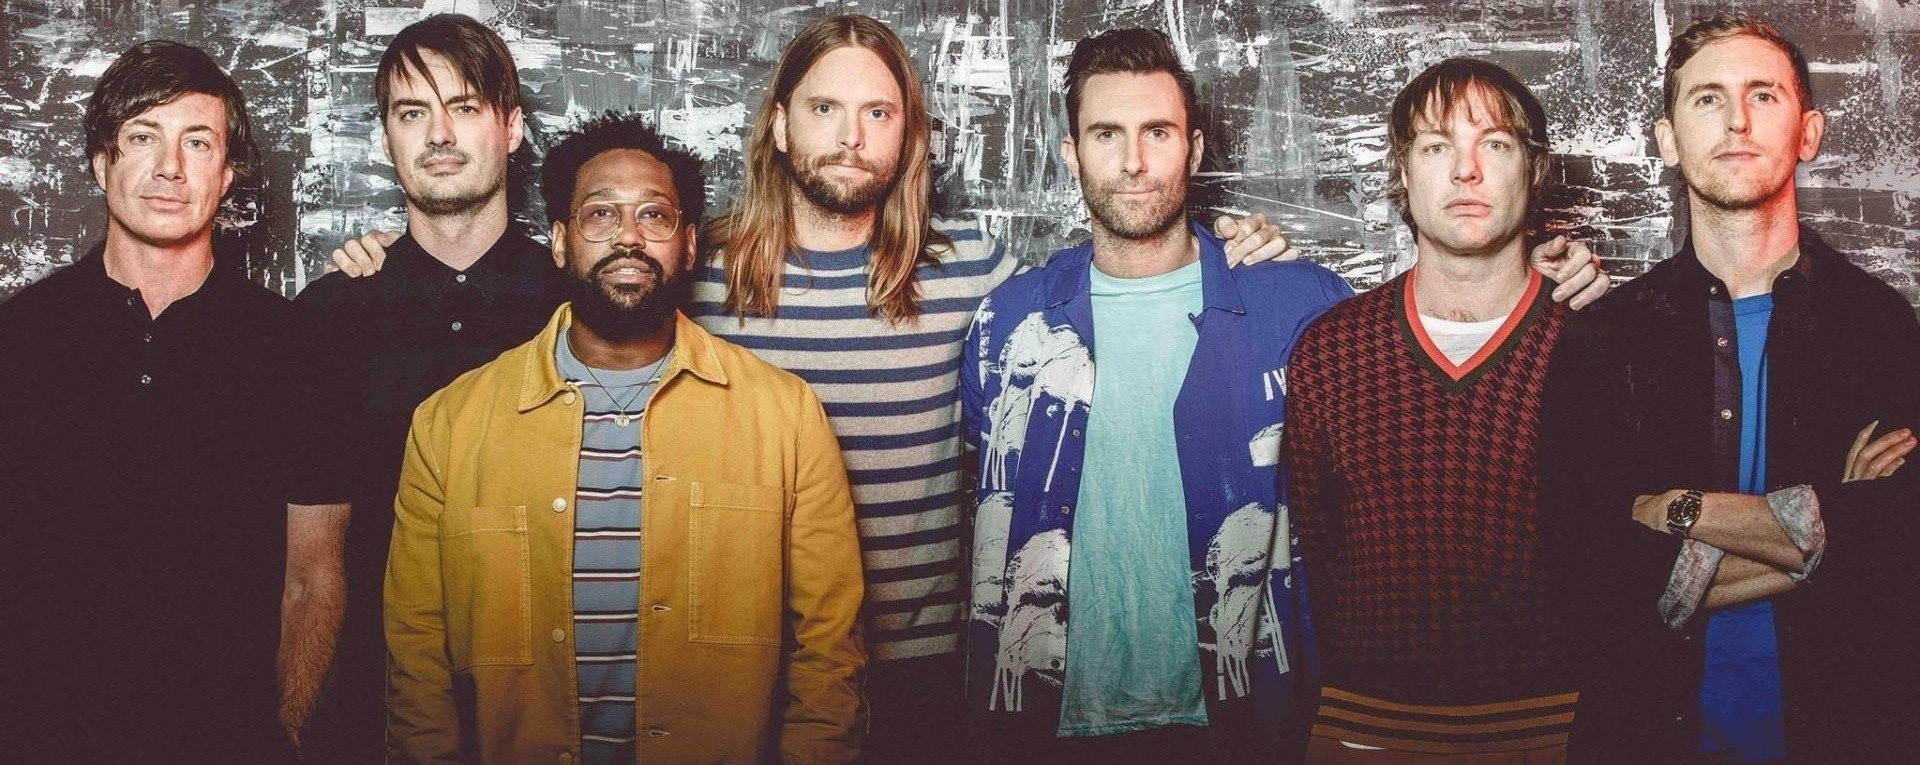 Maroon 5 'Red Pill Blues Tour' Live in Singapore